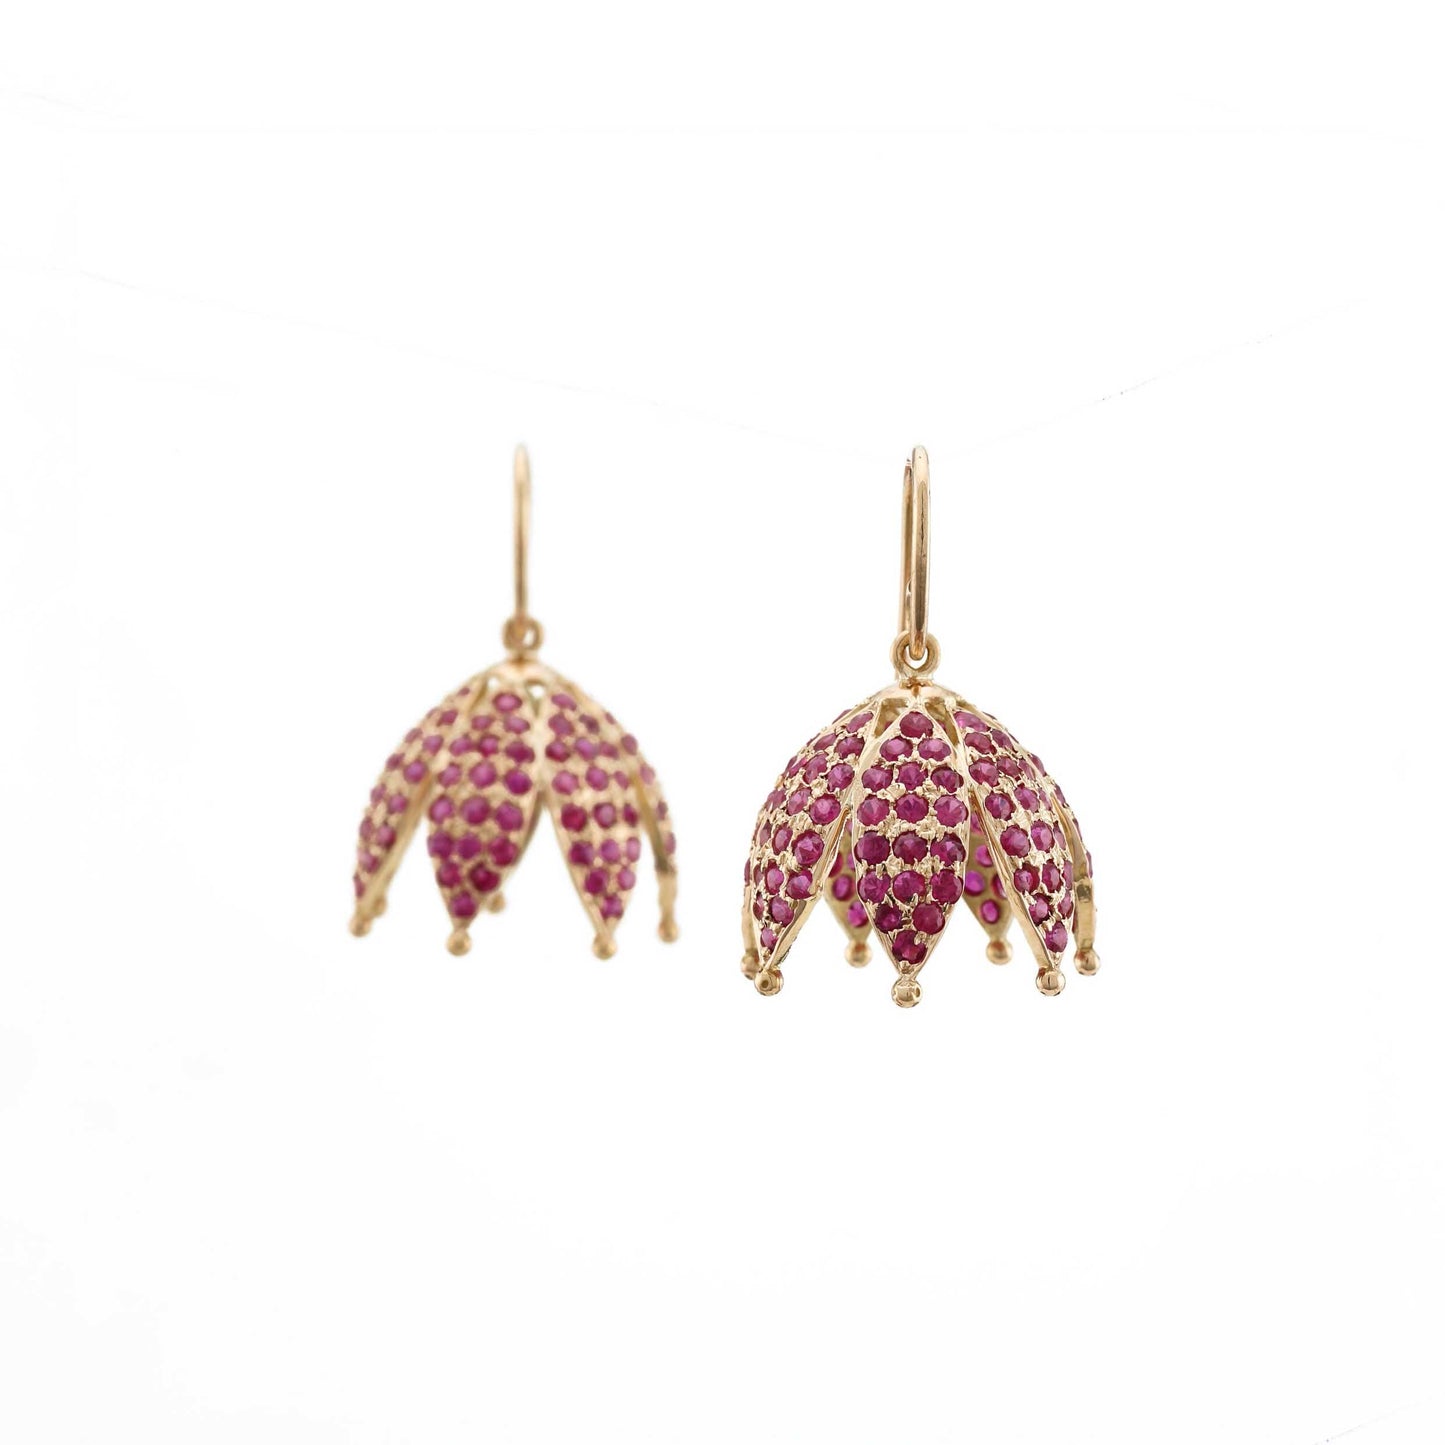 The Sejal Gold and Ruby Jhumka by Rasvihar